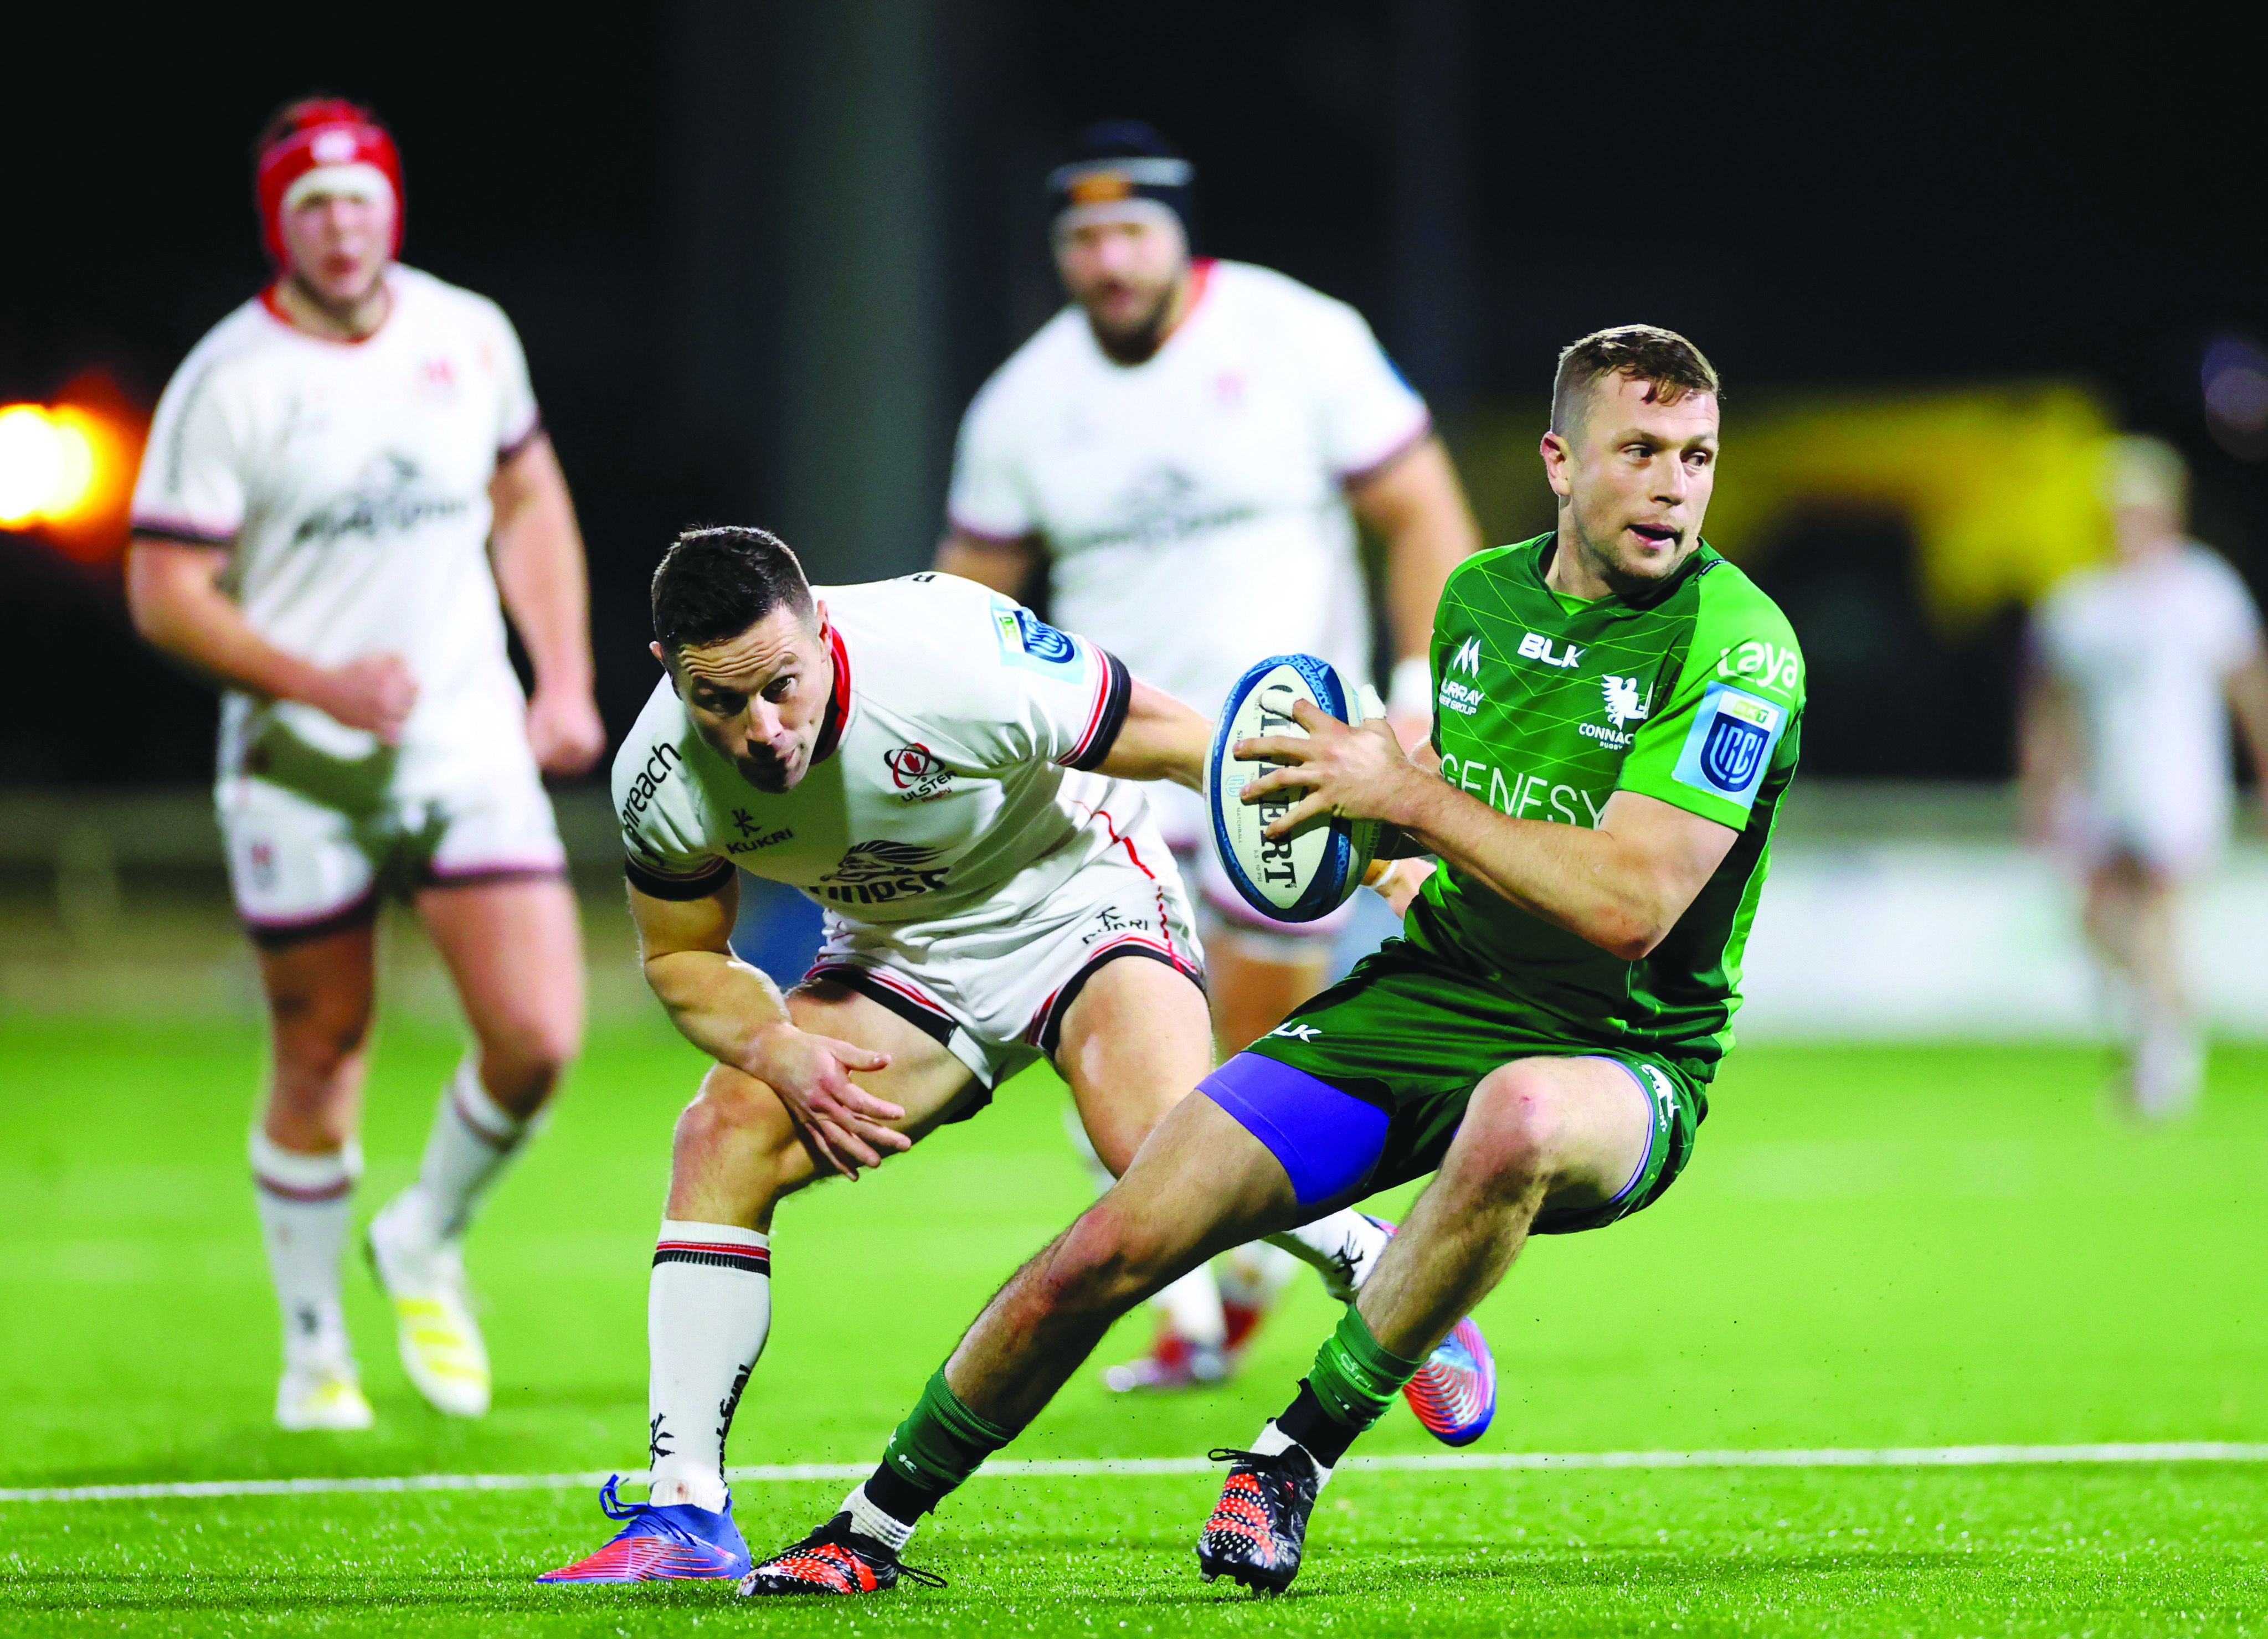 John Cooney and Jack Carty in action during Ulster’s win over Connacht at the Sportsground in December